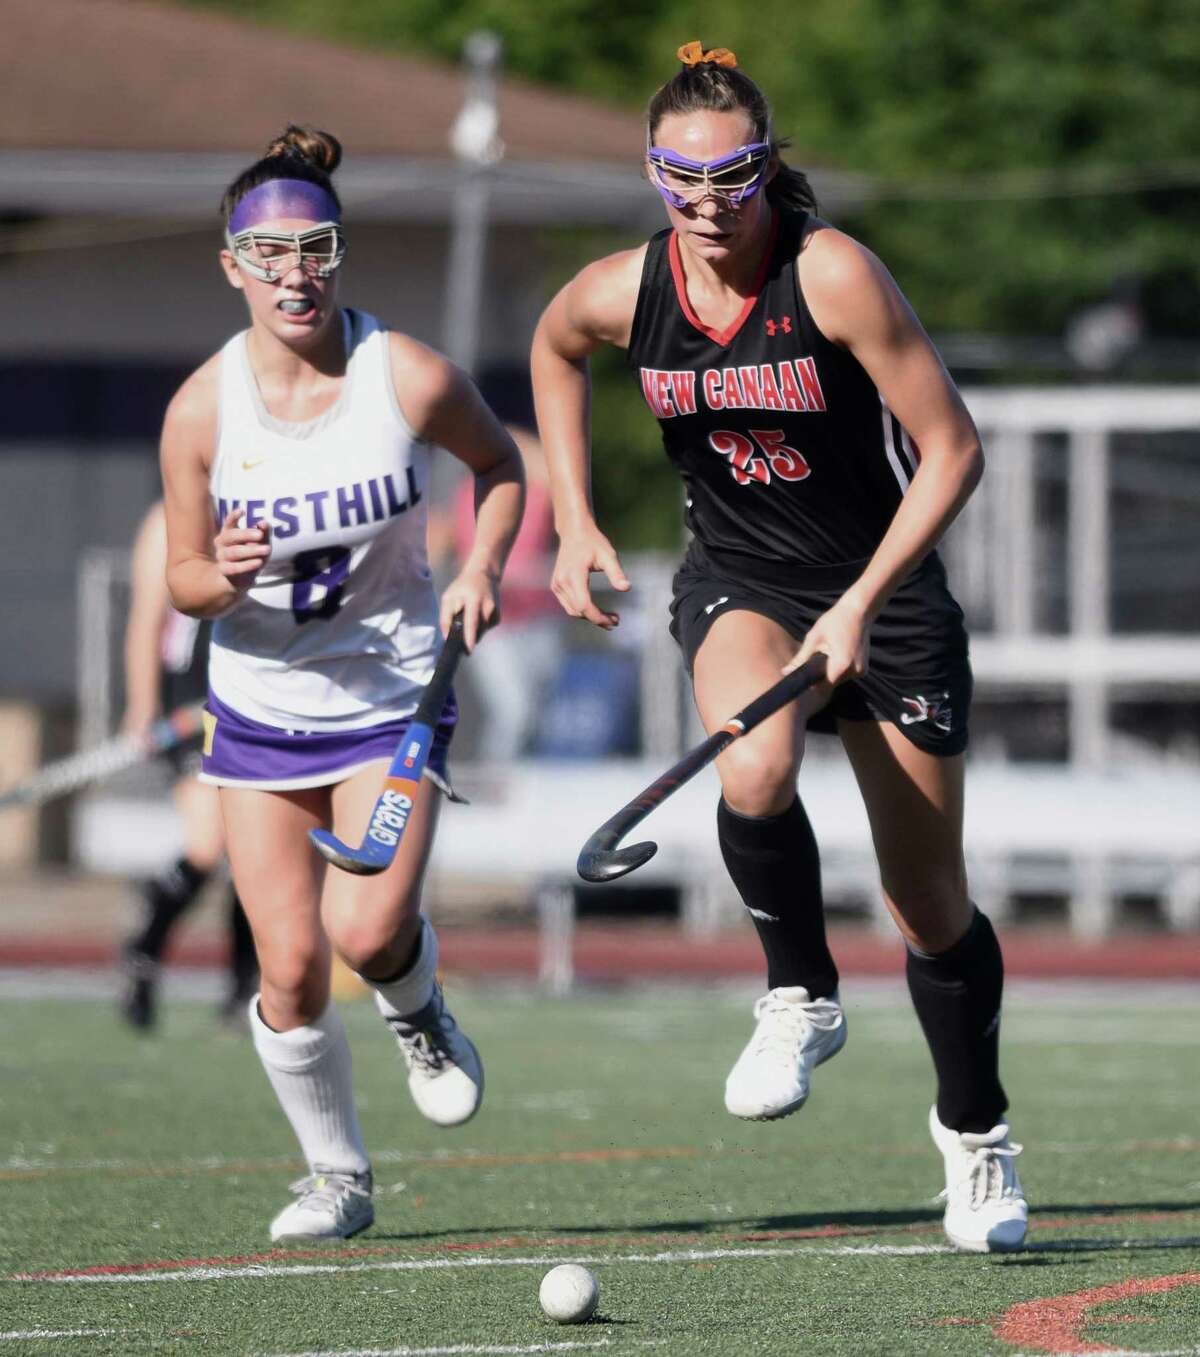 New Canaan's Polly Parsons-Hills (25) gets to the ball with Westhill's Hannah Burton (8) in pursuit during a field hockey game at Westhill High School in Stamford on Thursday, Sept. 19, 2019.